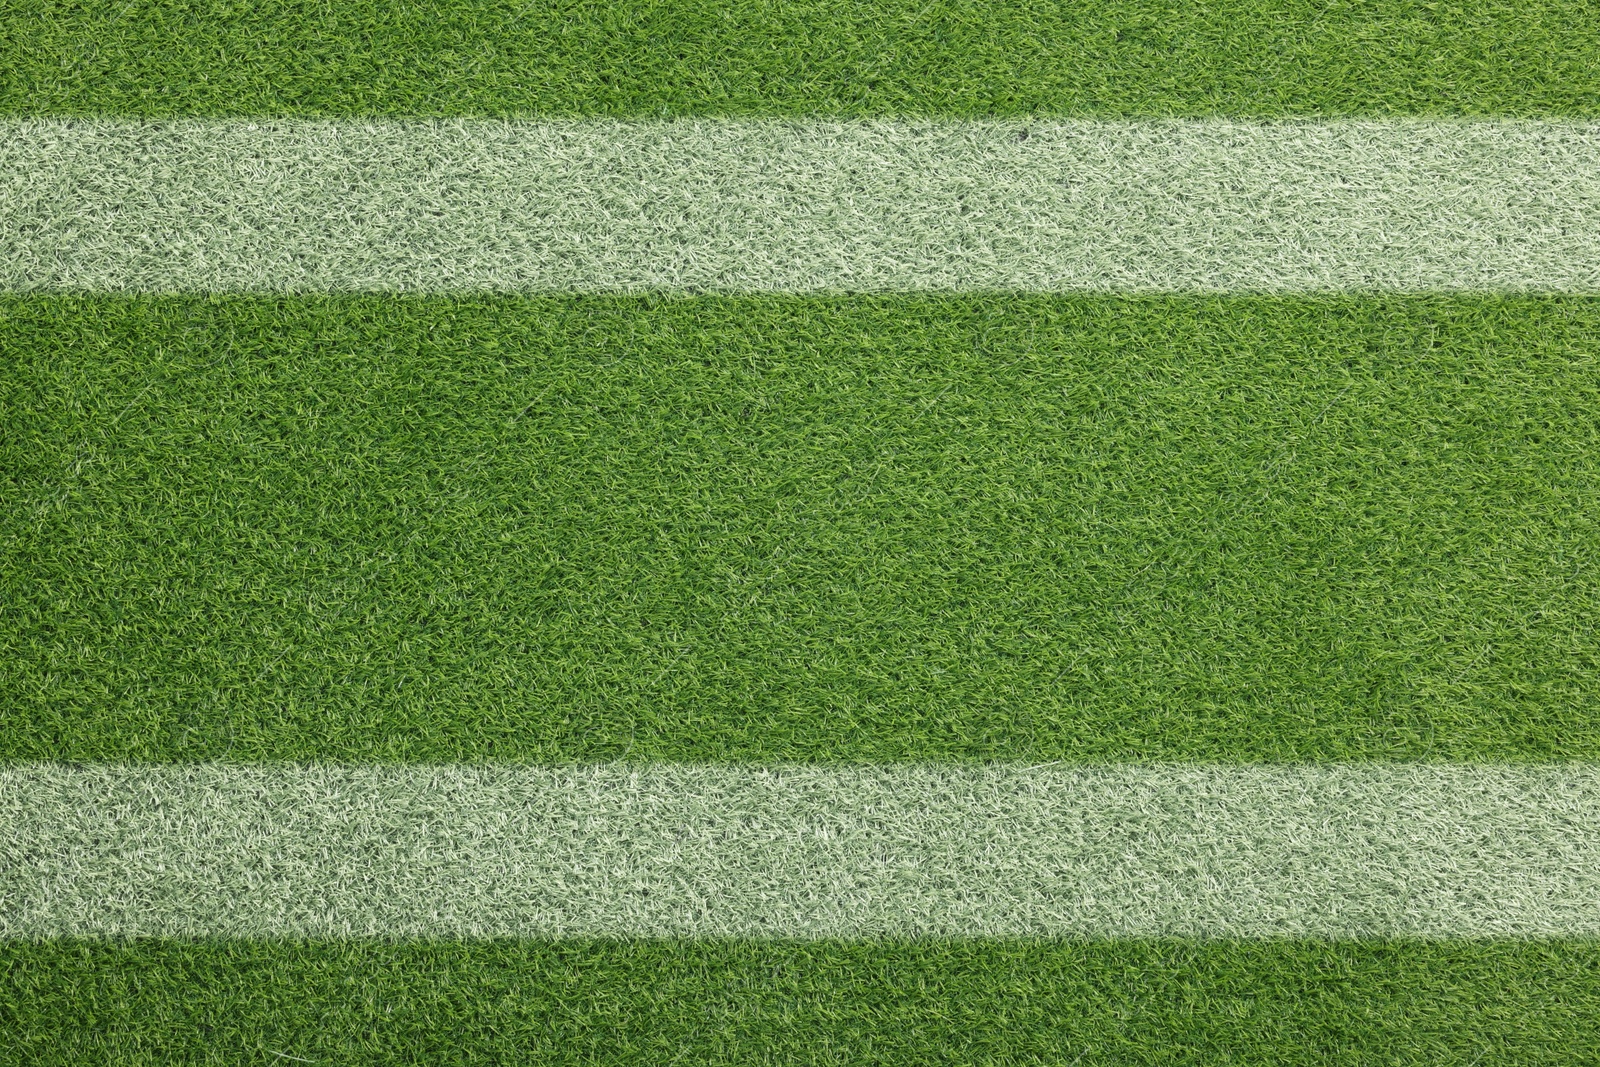 Image of Green grass with white markings, top view